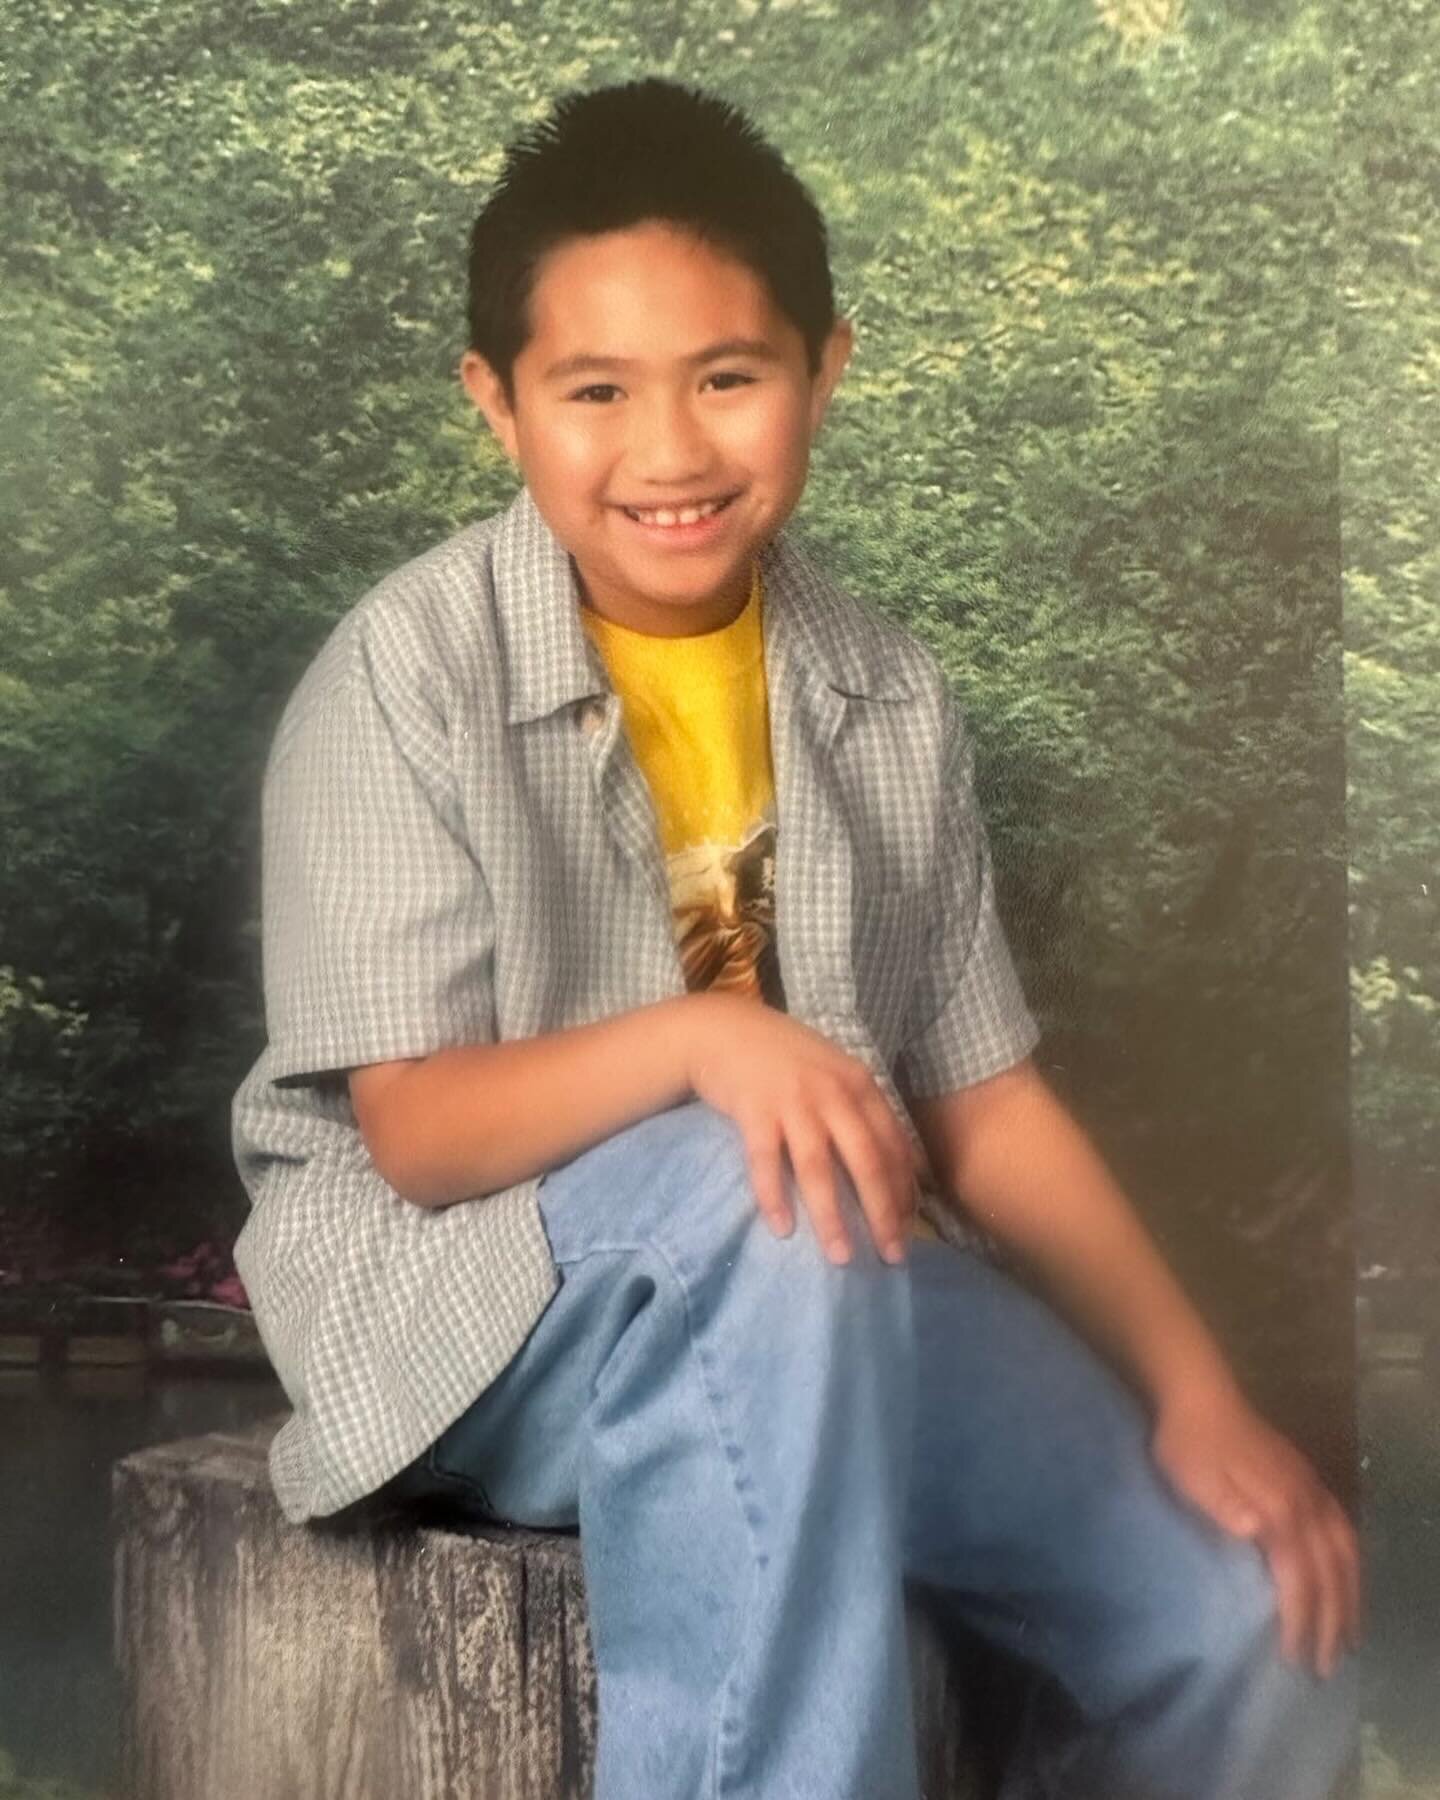 Before he was our fearless music director and extraordinary leader, this Echo OG was serving looks and tearing up the soccer field. Give it up for&hellip;.

🎶 ANDREW (tenor/baritone) 🎶